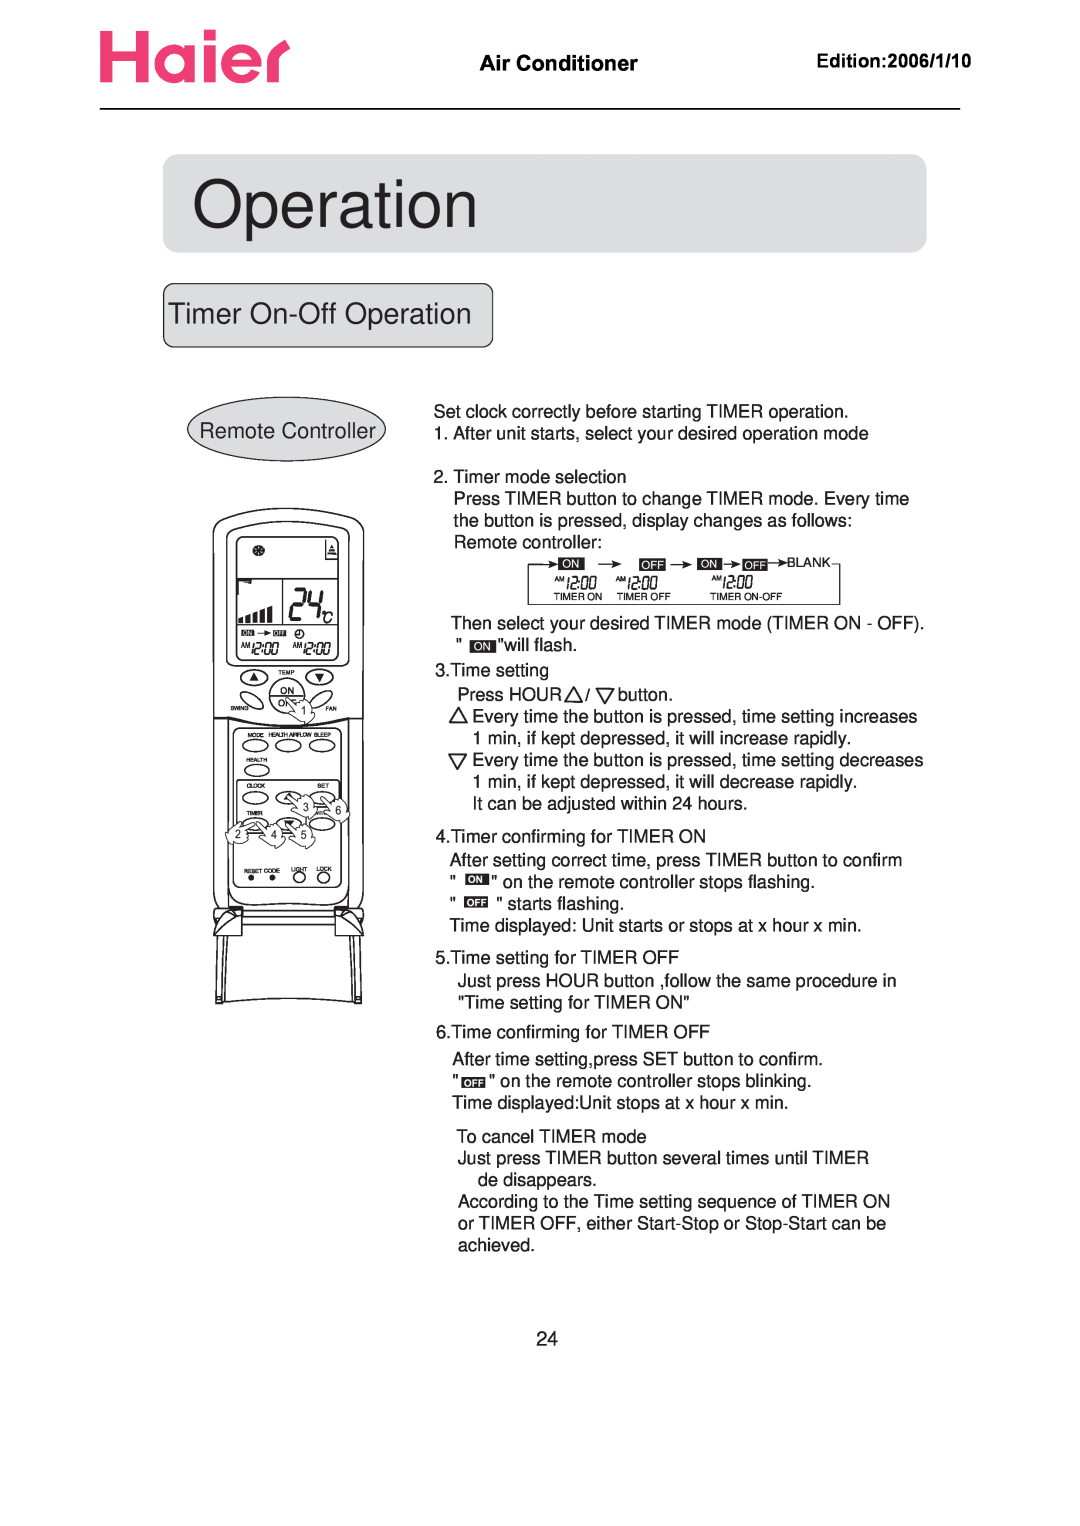 Haier Compact Air Conditioner manual Timer On-OffOperation, Remote Controller, Air Conditioner       